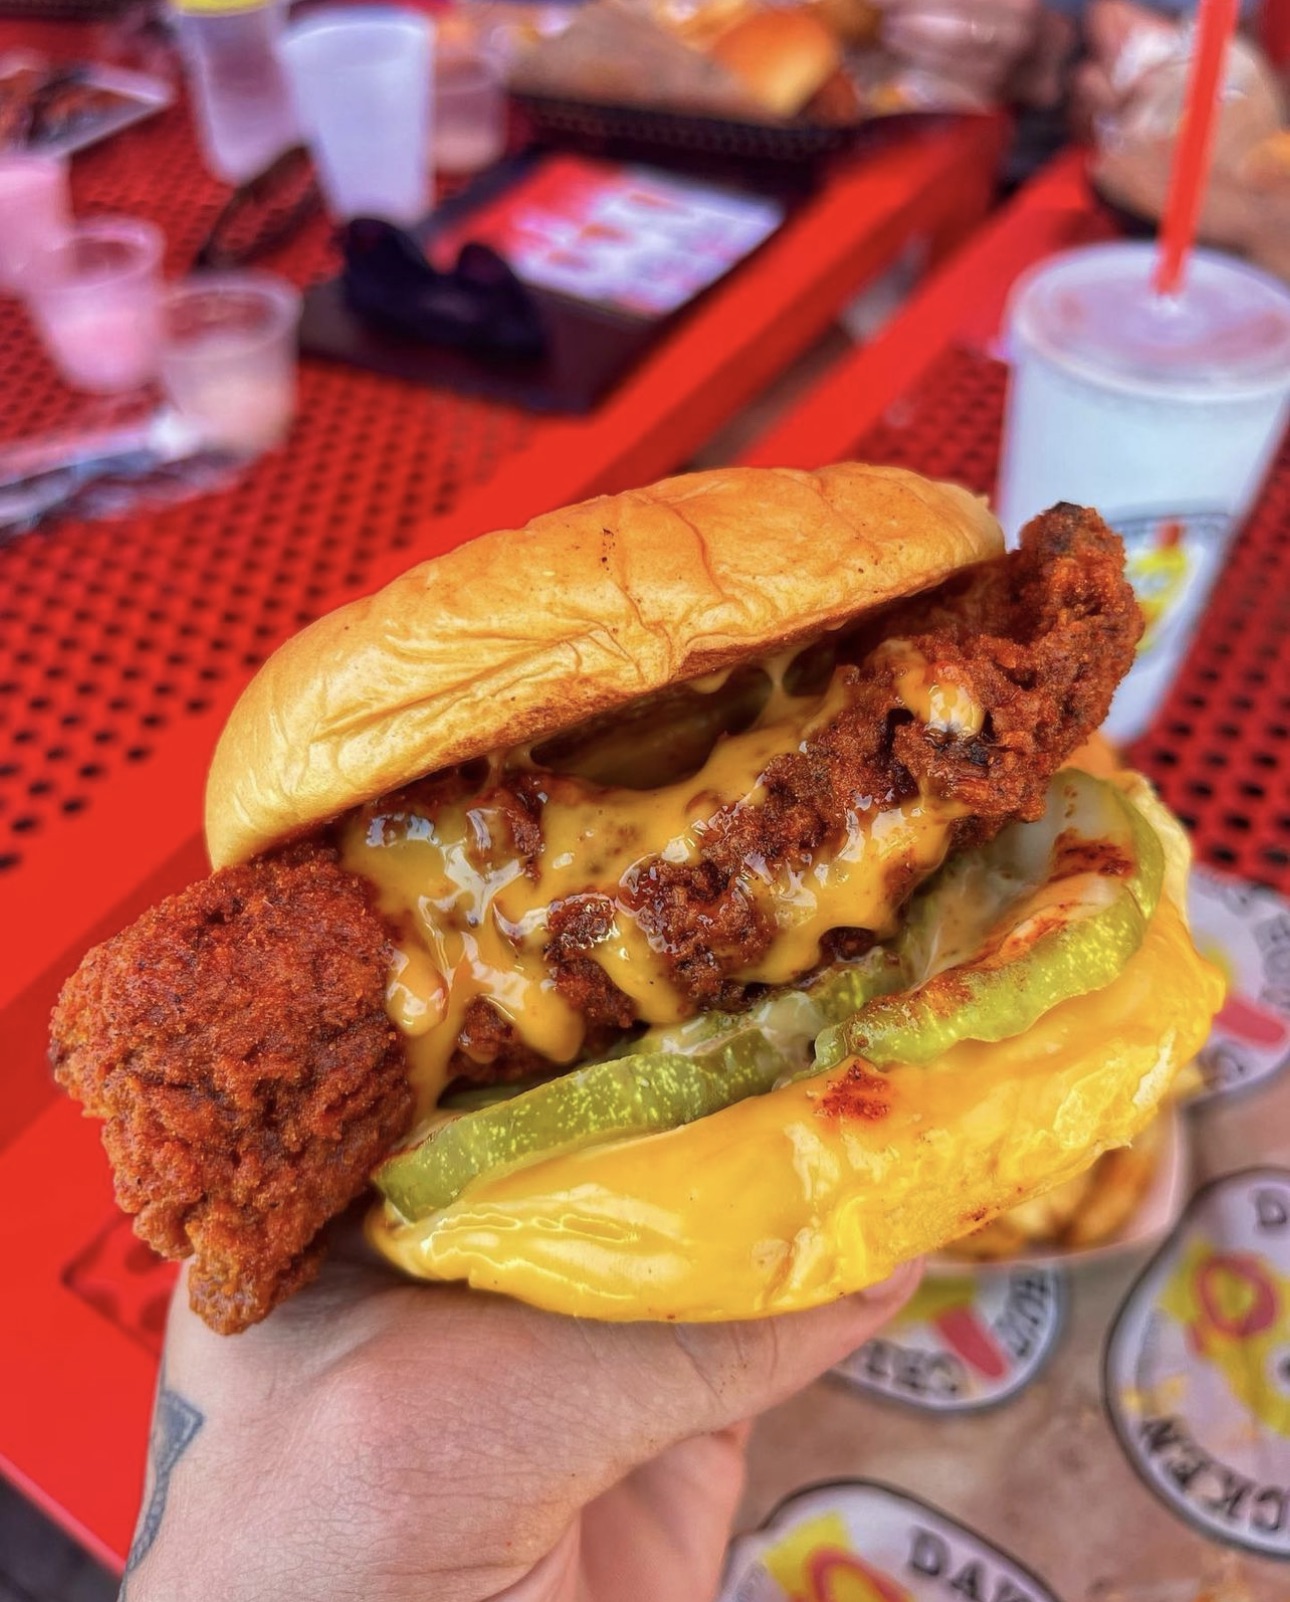 Everyone Gets a Slider for Downloading the Dave’s Hot Chicken App